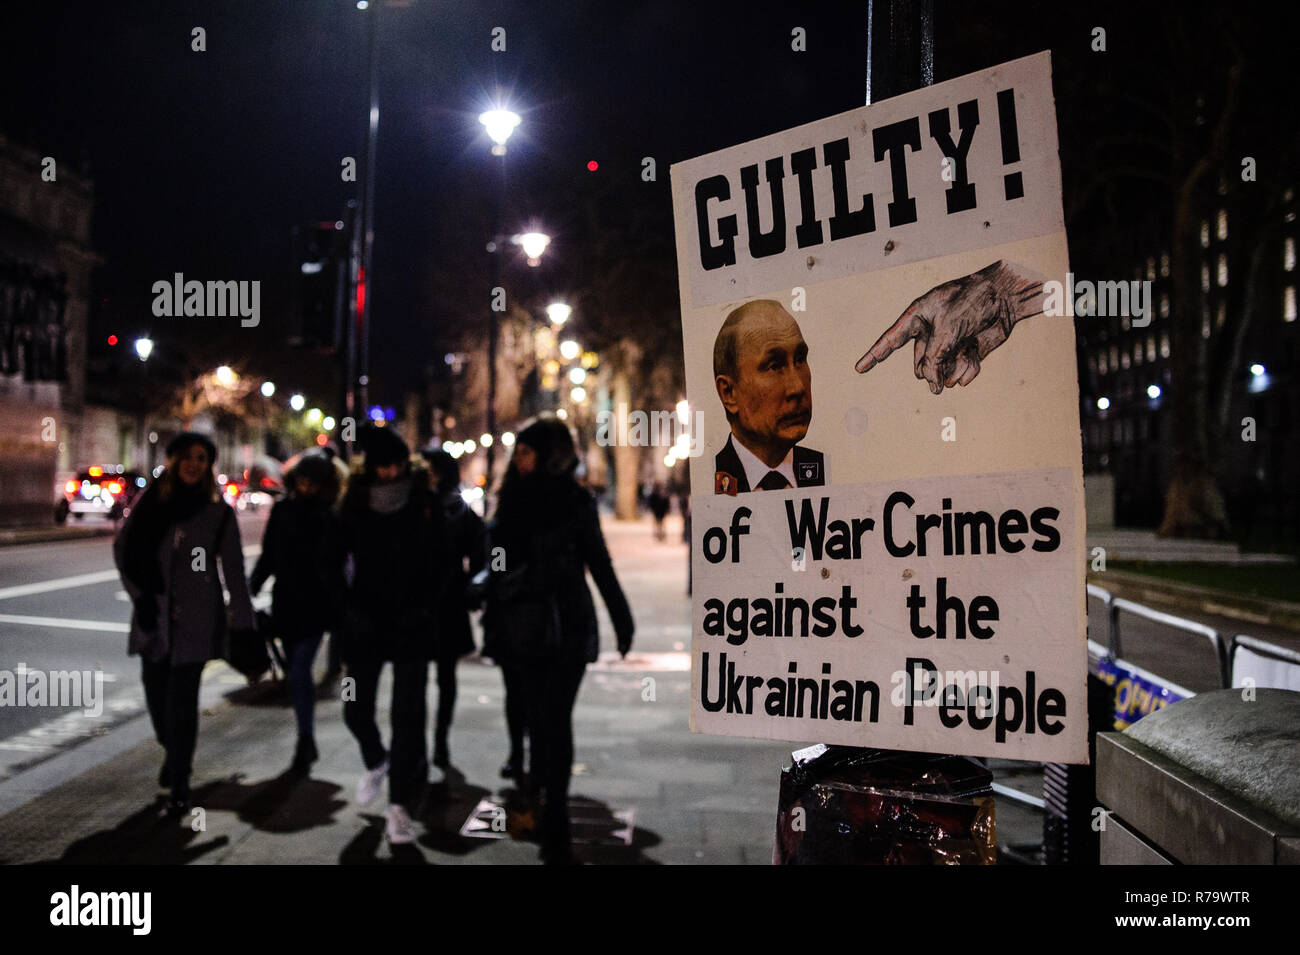 A placard with Putin's picture seen on a street pole during the demonstration. Ukrainian expats held an anti-Putin demonstration opposite Downing Street on Whitehall in central London. Tensions between Ukraine and Russia have reached a new height in recent weeks with the Russian seizure of three Ukrainian naval vessels, prompting Ukraine to declare martial law in several border regions. Stock Photo